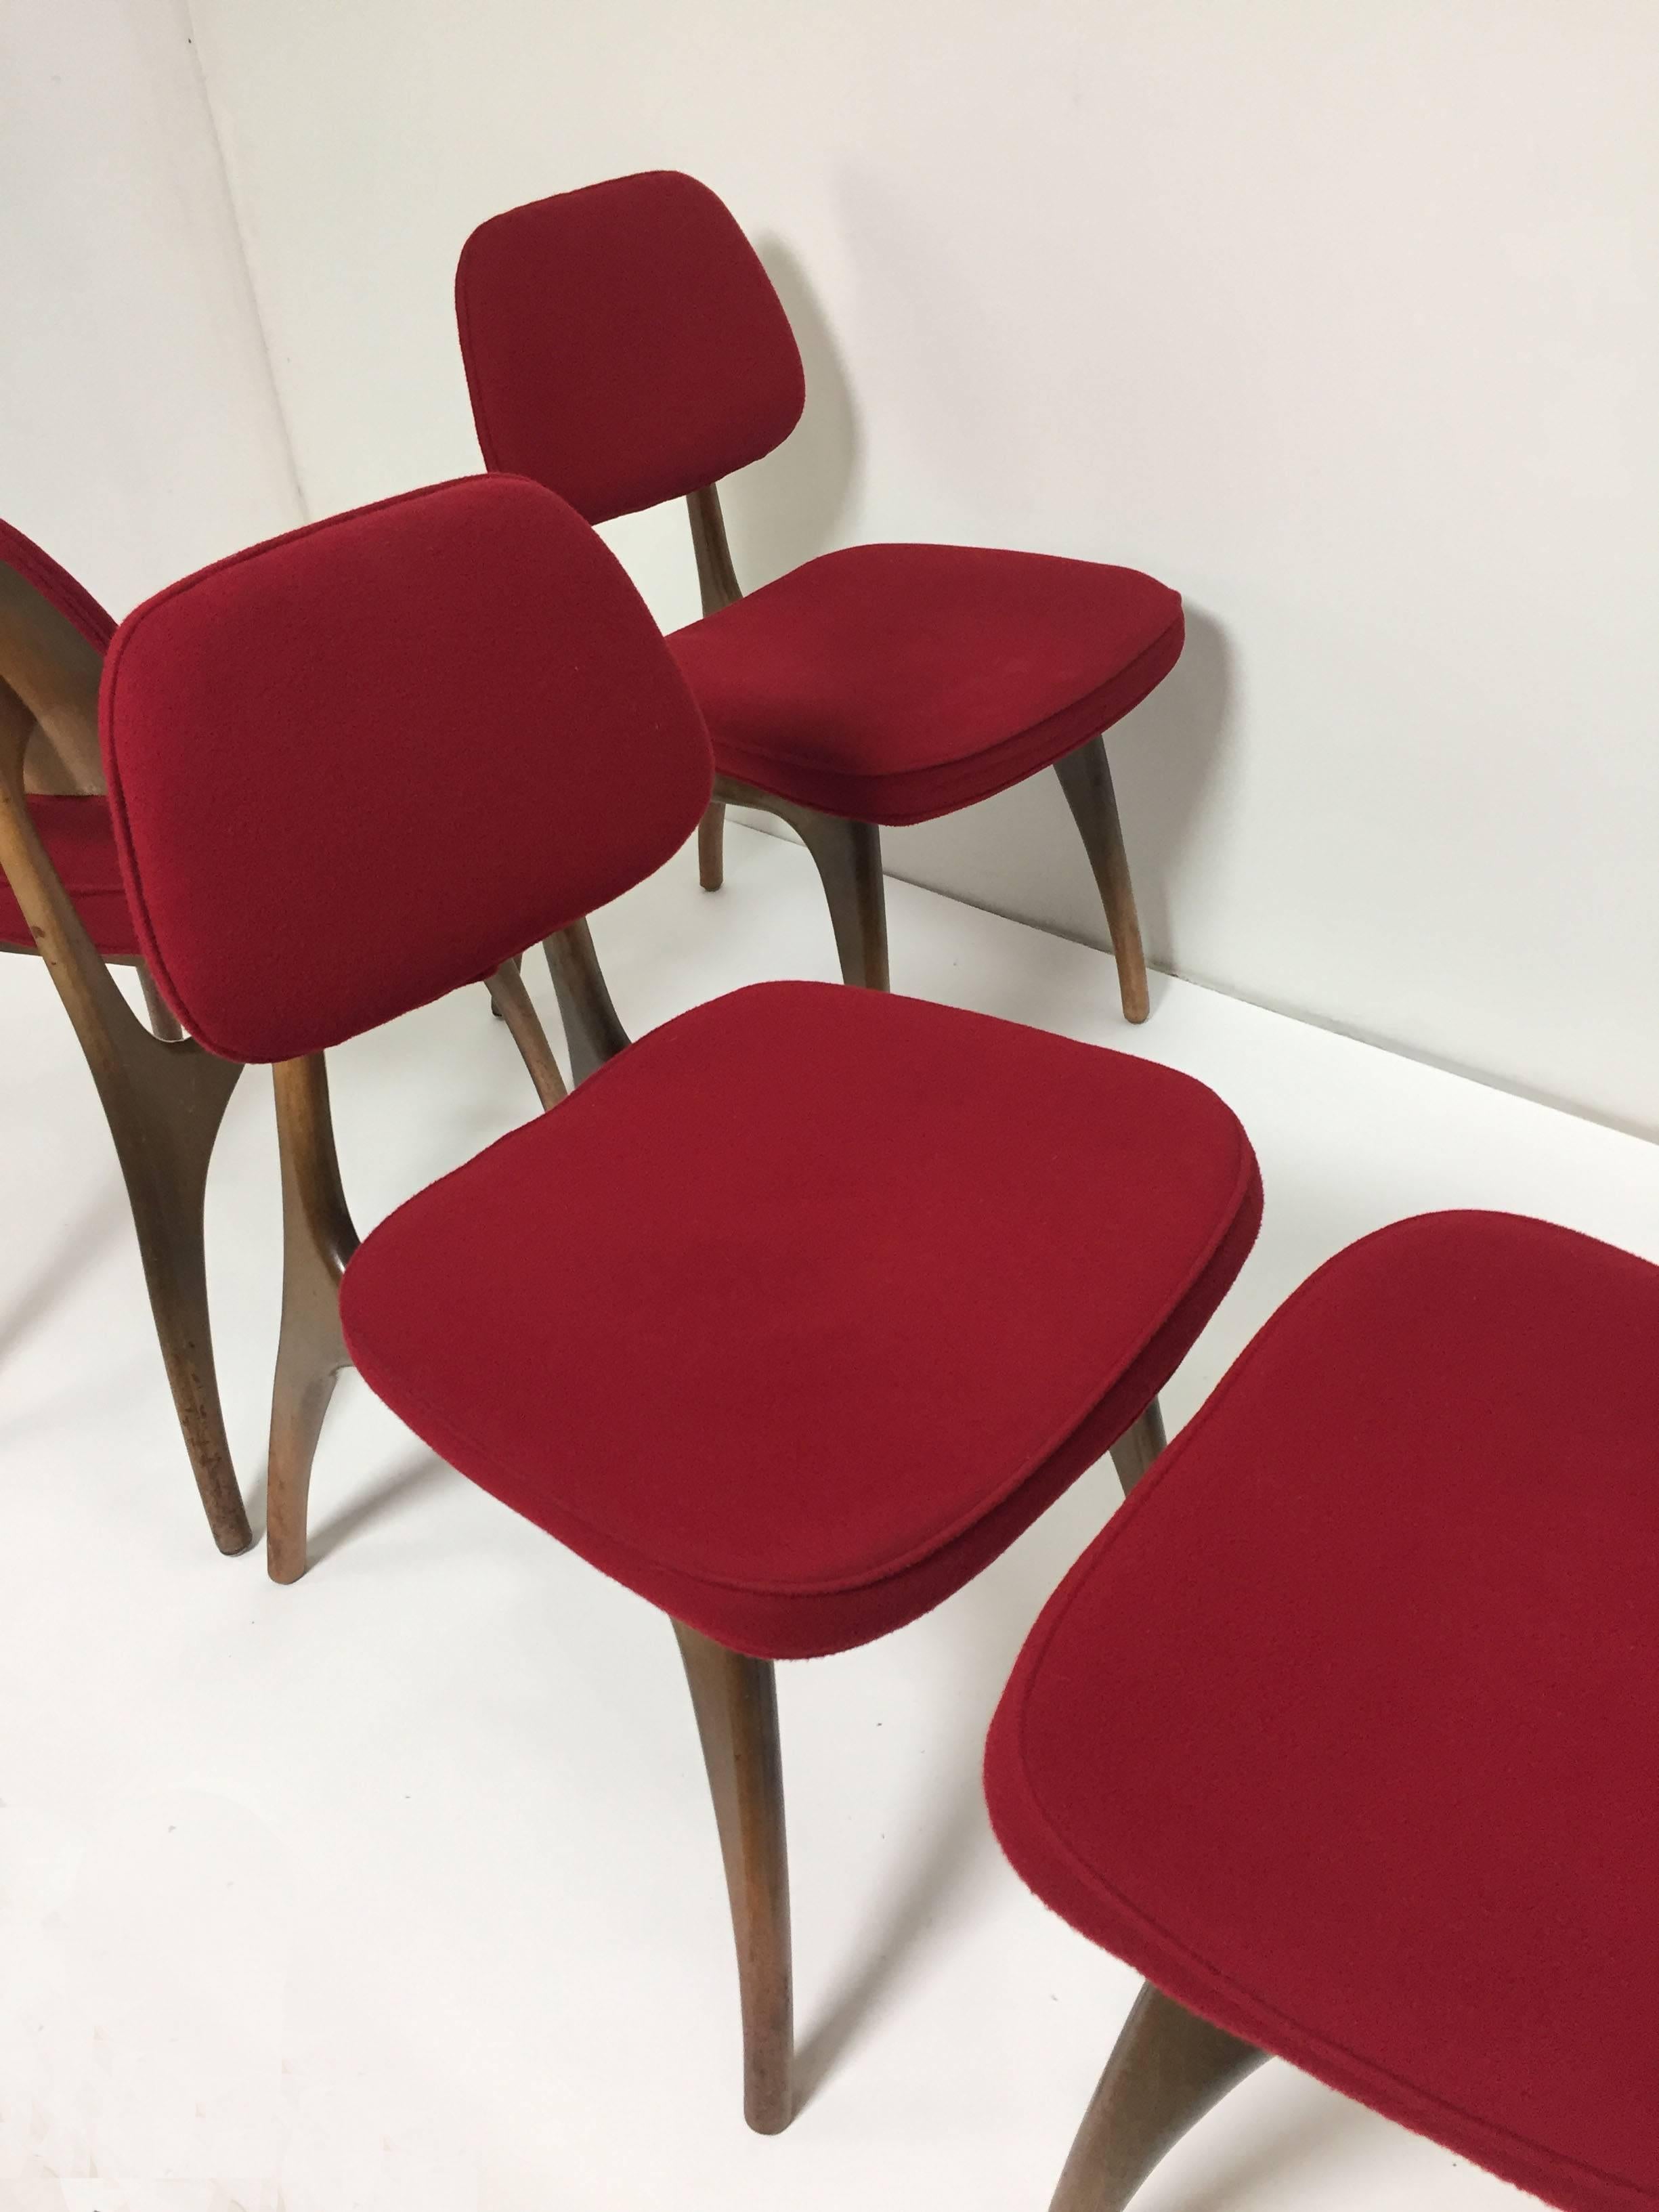 American Set of Six Midcentury Dining Chairs